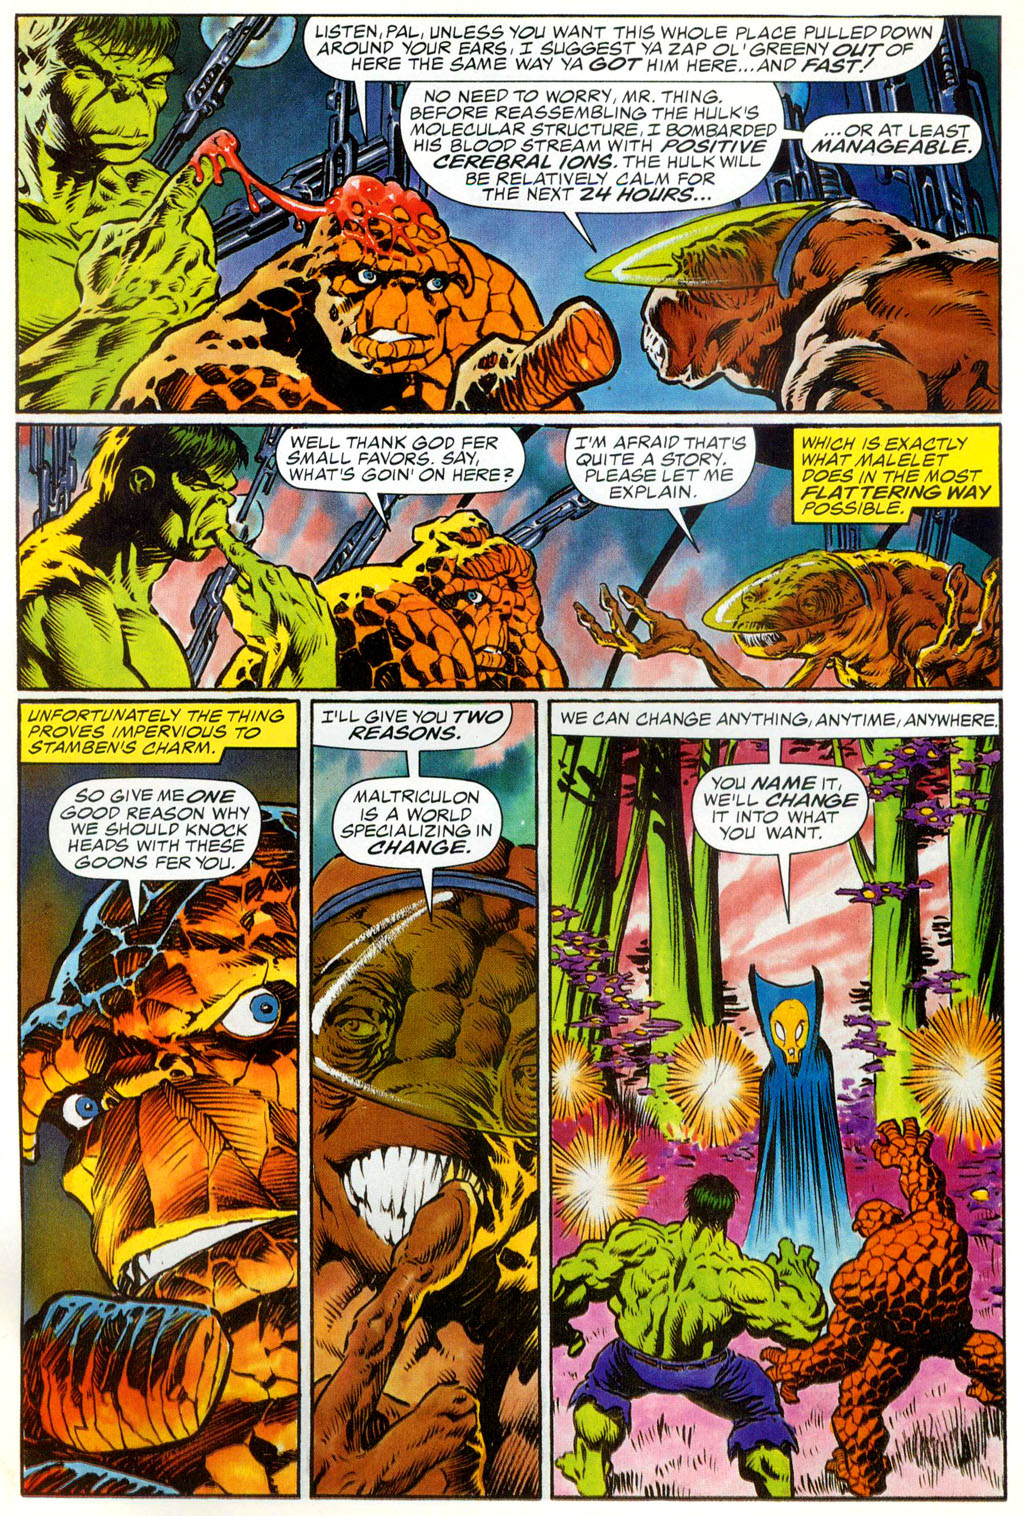 Read online Marvel Graphic Novel comic -  Issue #29 - Hulk & Thing - The Big Change - 18